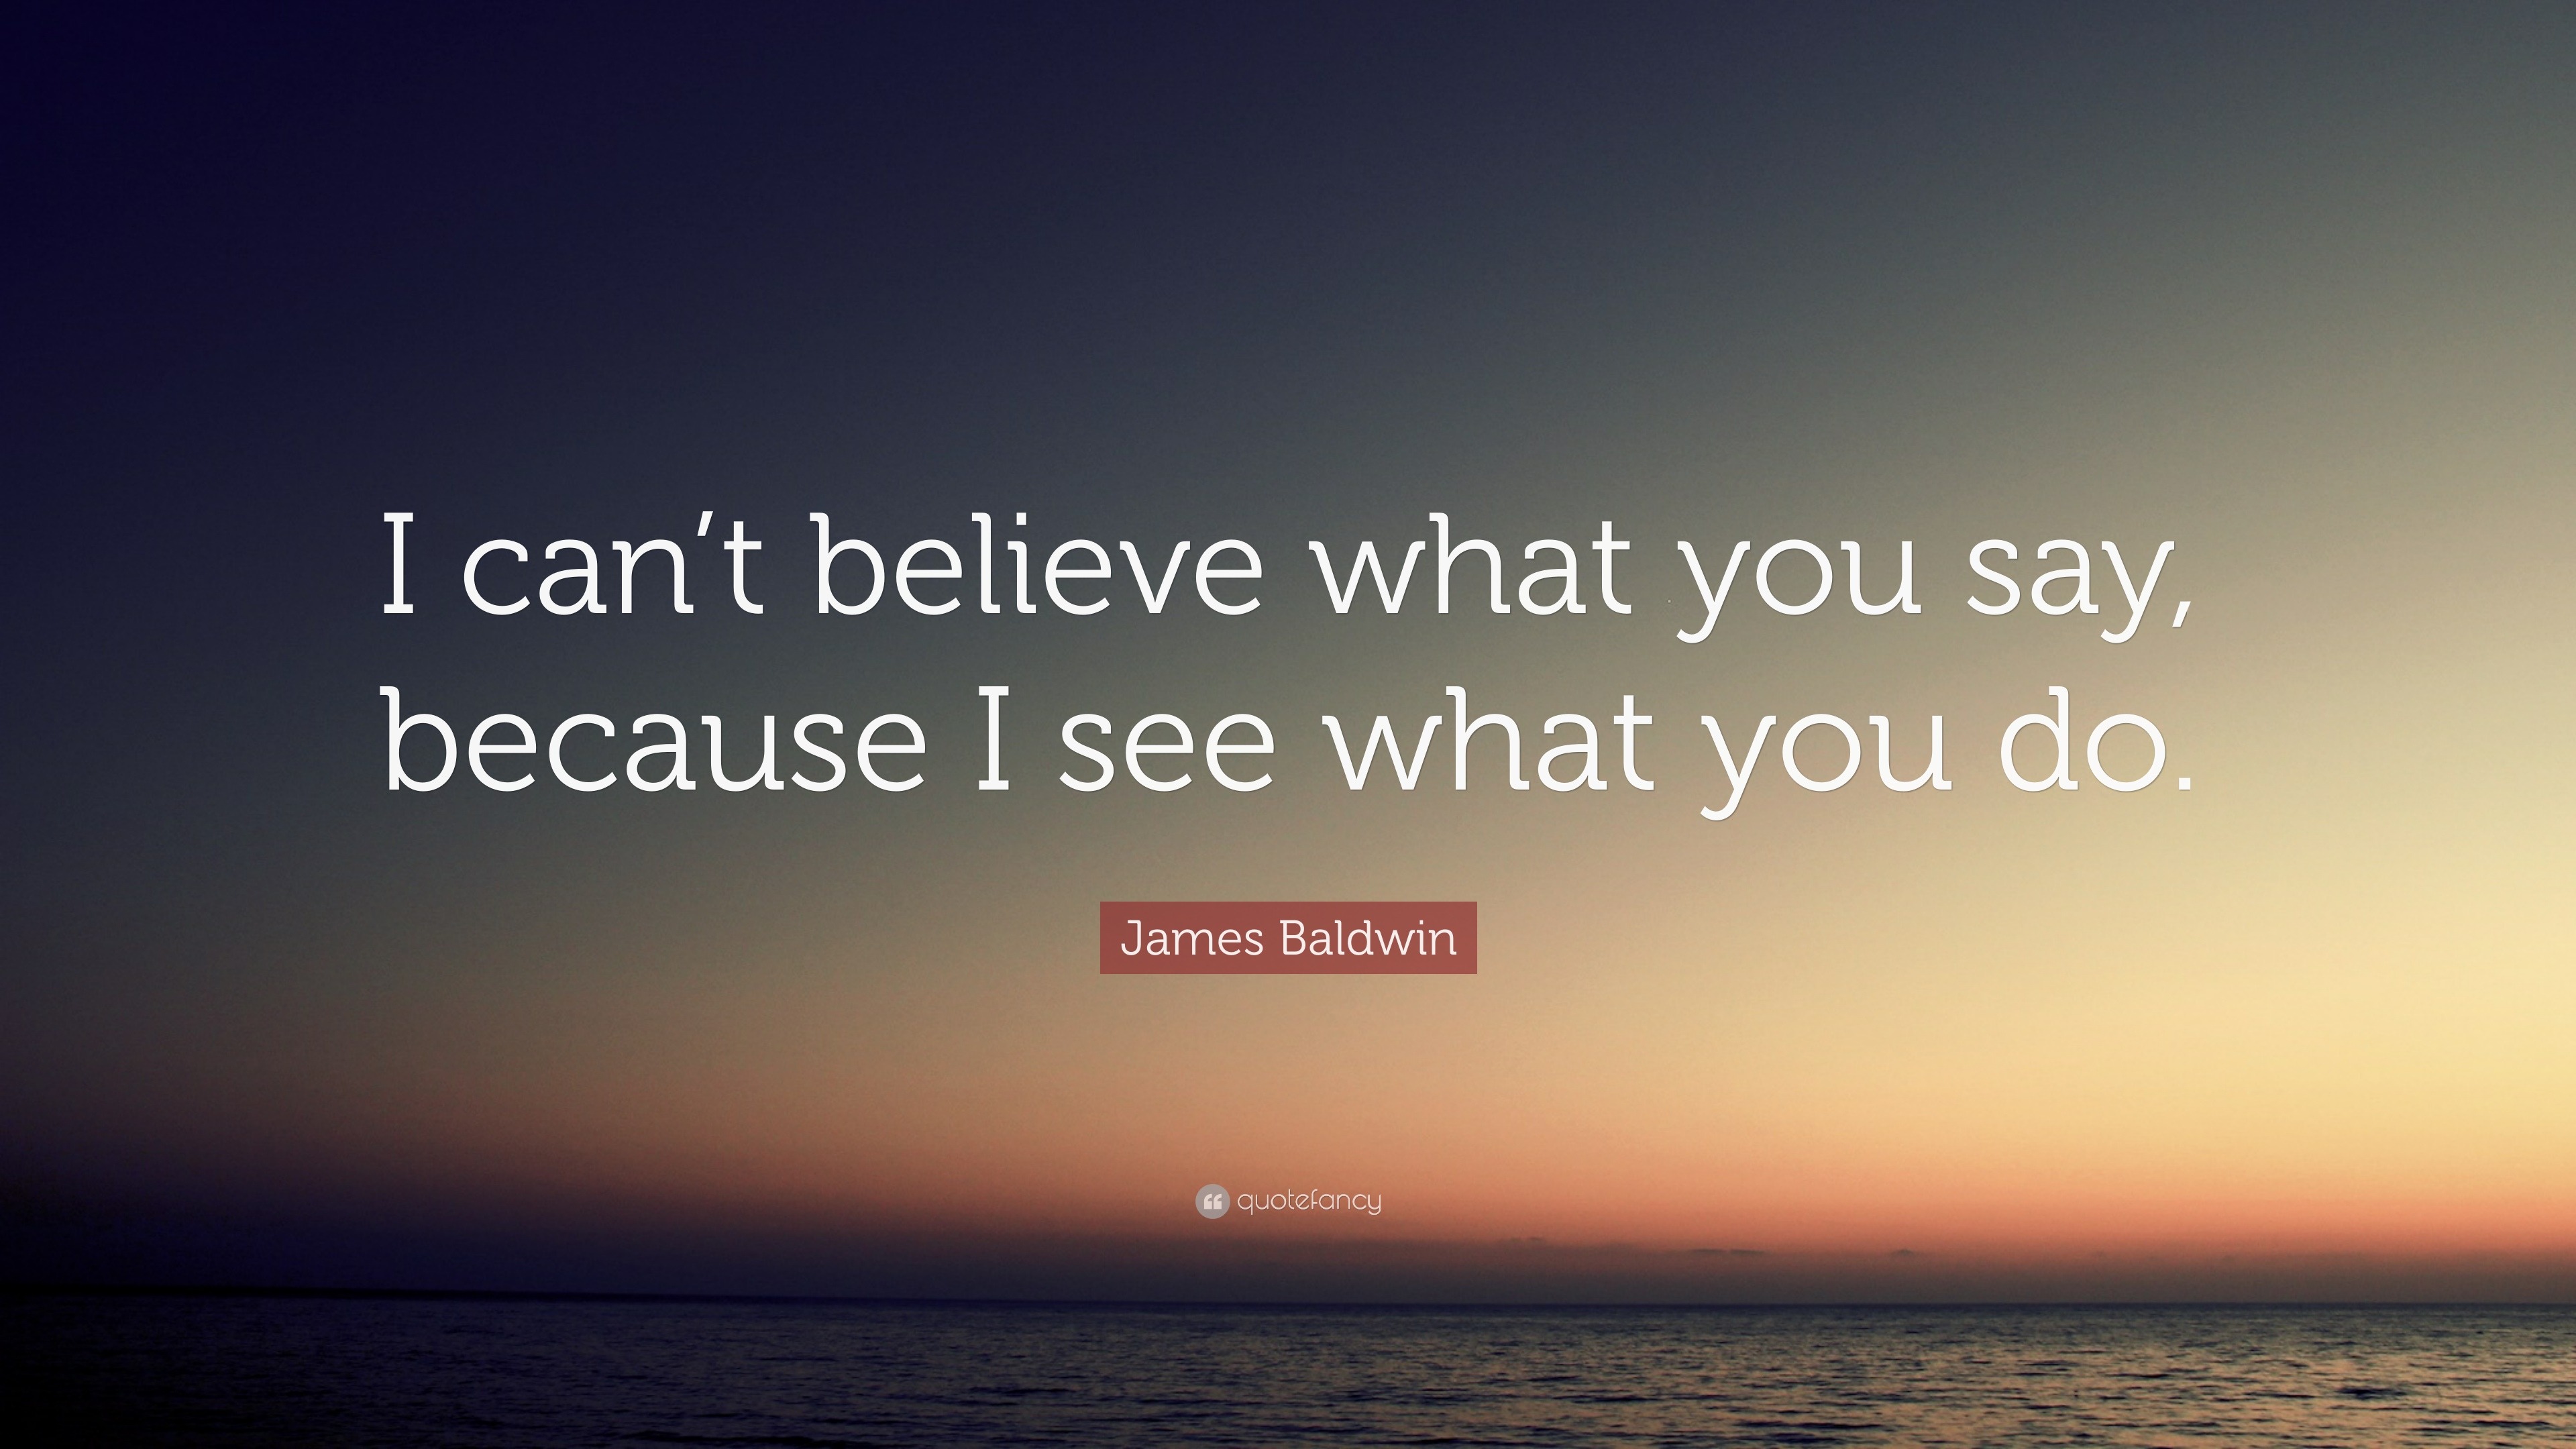 James Baldwin Quote: “I can't believe what you say, because I see